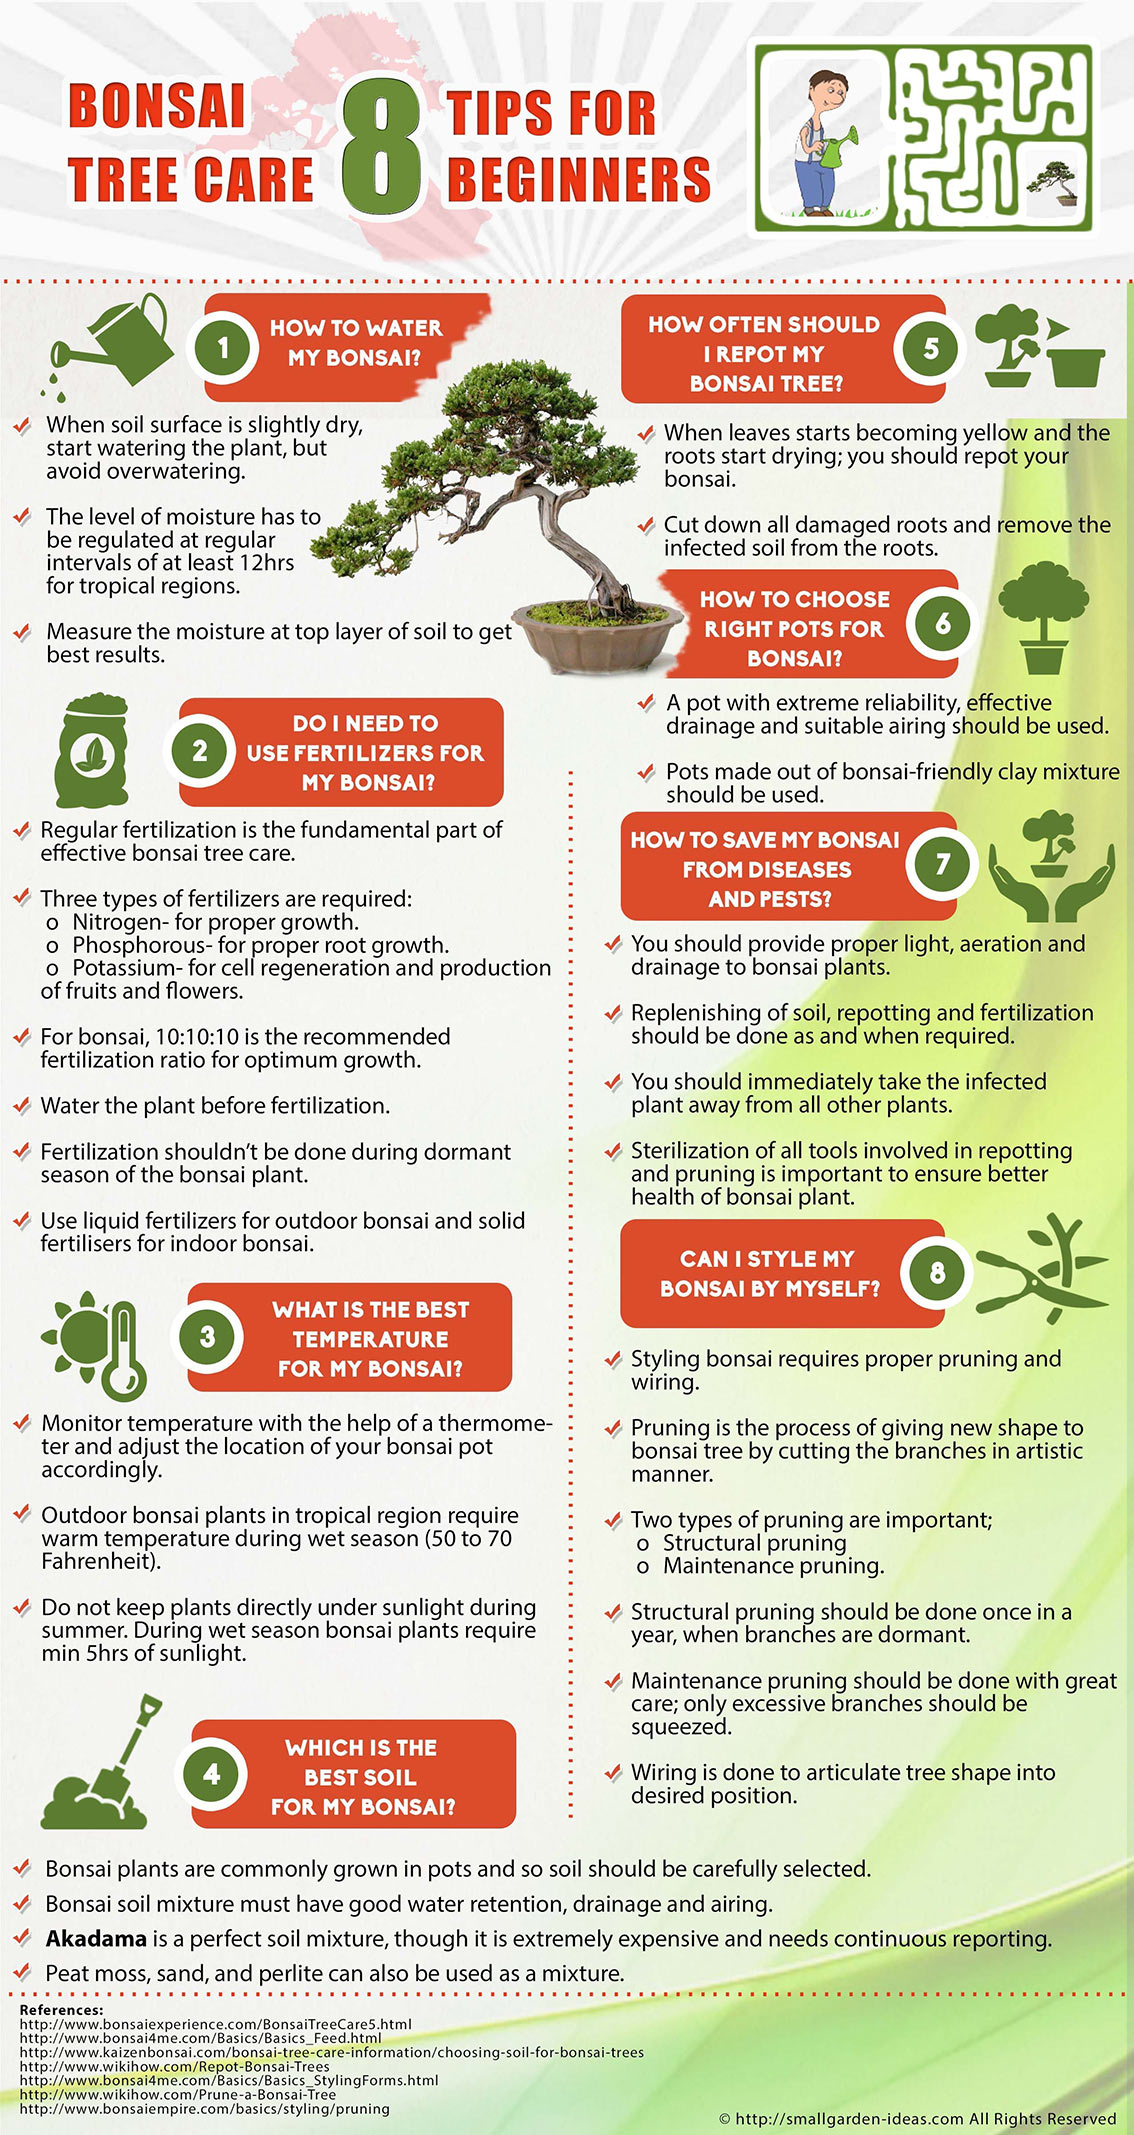 Bonsai Tree Care Tips for Beginners Infographic